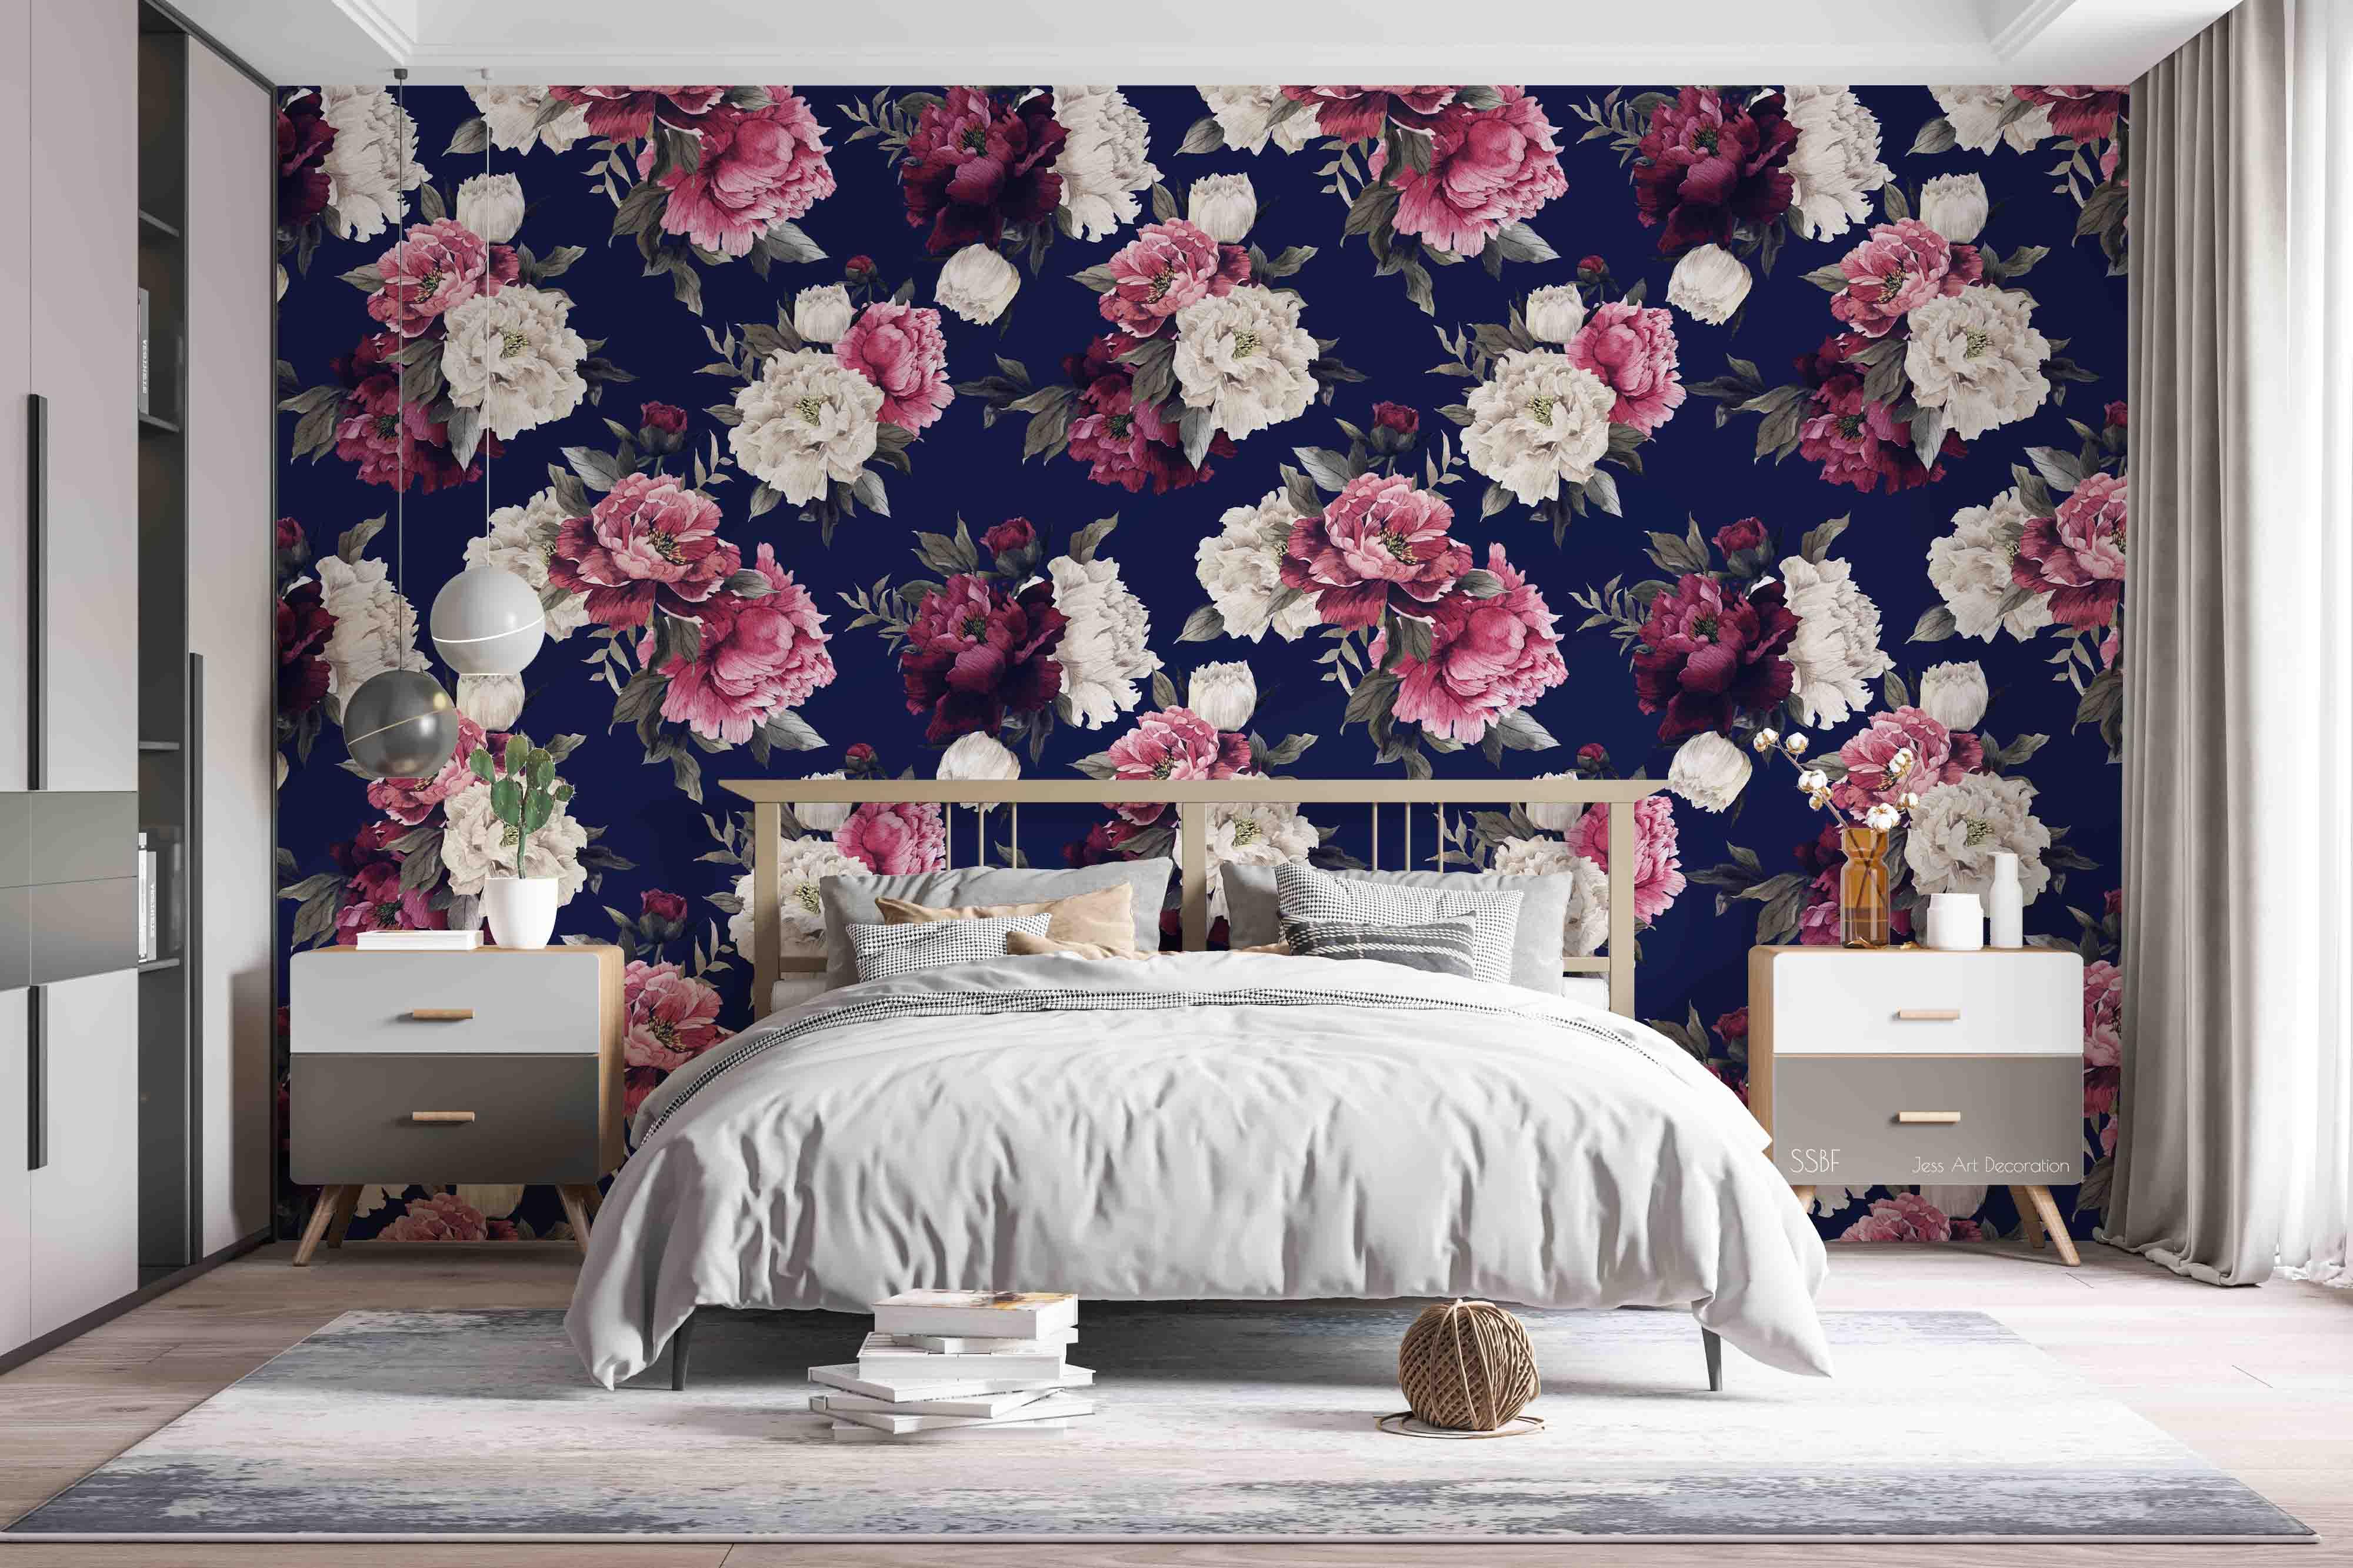 3D Vintage Blooming Peony Pattern Wall Mural Wallpaper GD 3531- Jess Art Decoration